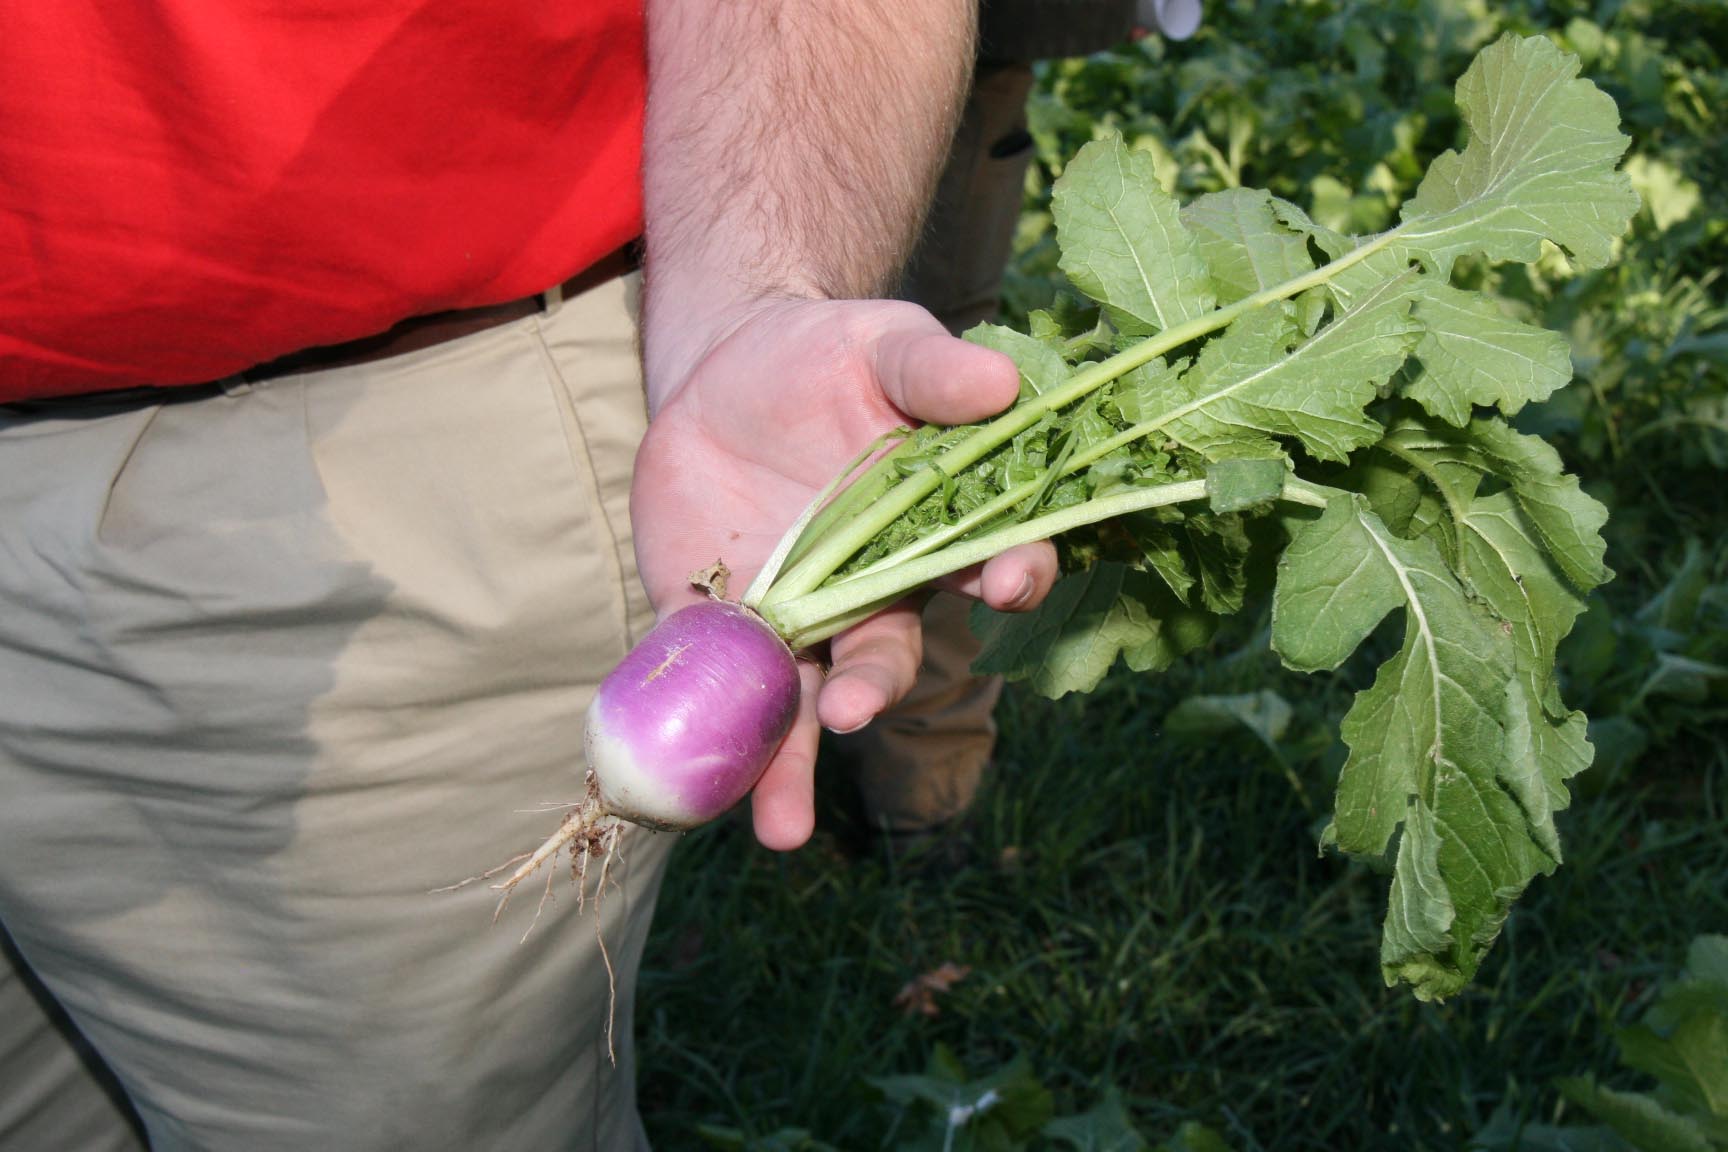 Hancock recommends turnips or turnip hybrids like 'Appin' or 'Pasja' for use in Georgia. While there are brassicas bred specifically for pasture use, many cattle farmers have had luck incorporating traditional garden variety turnips, like 'Purpletop.'